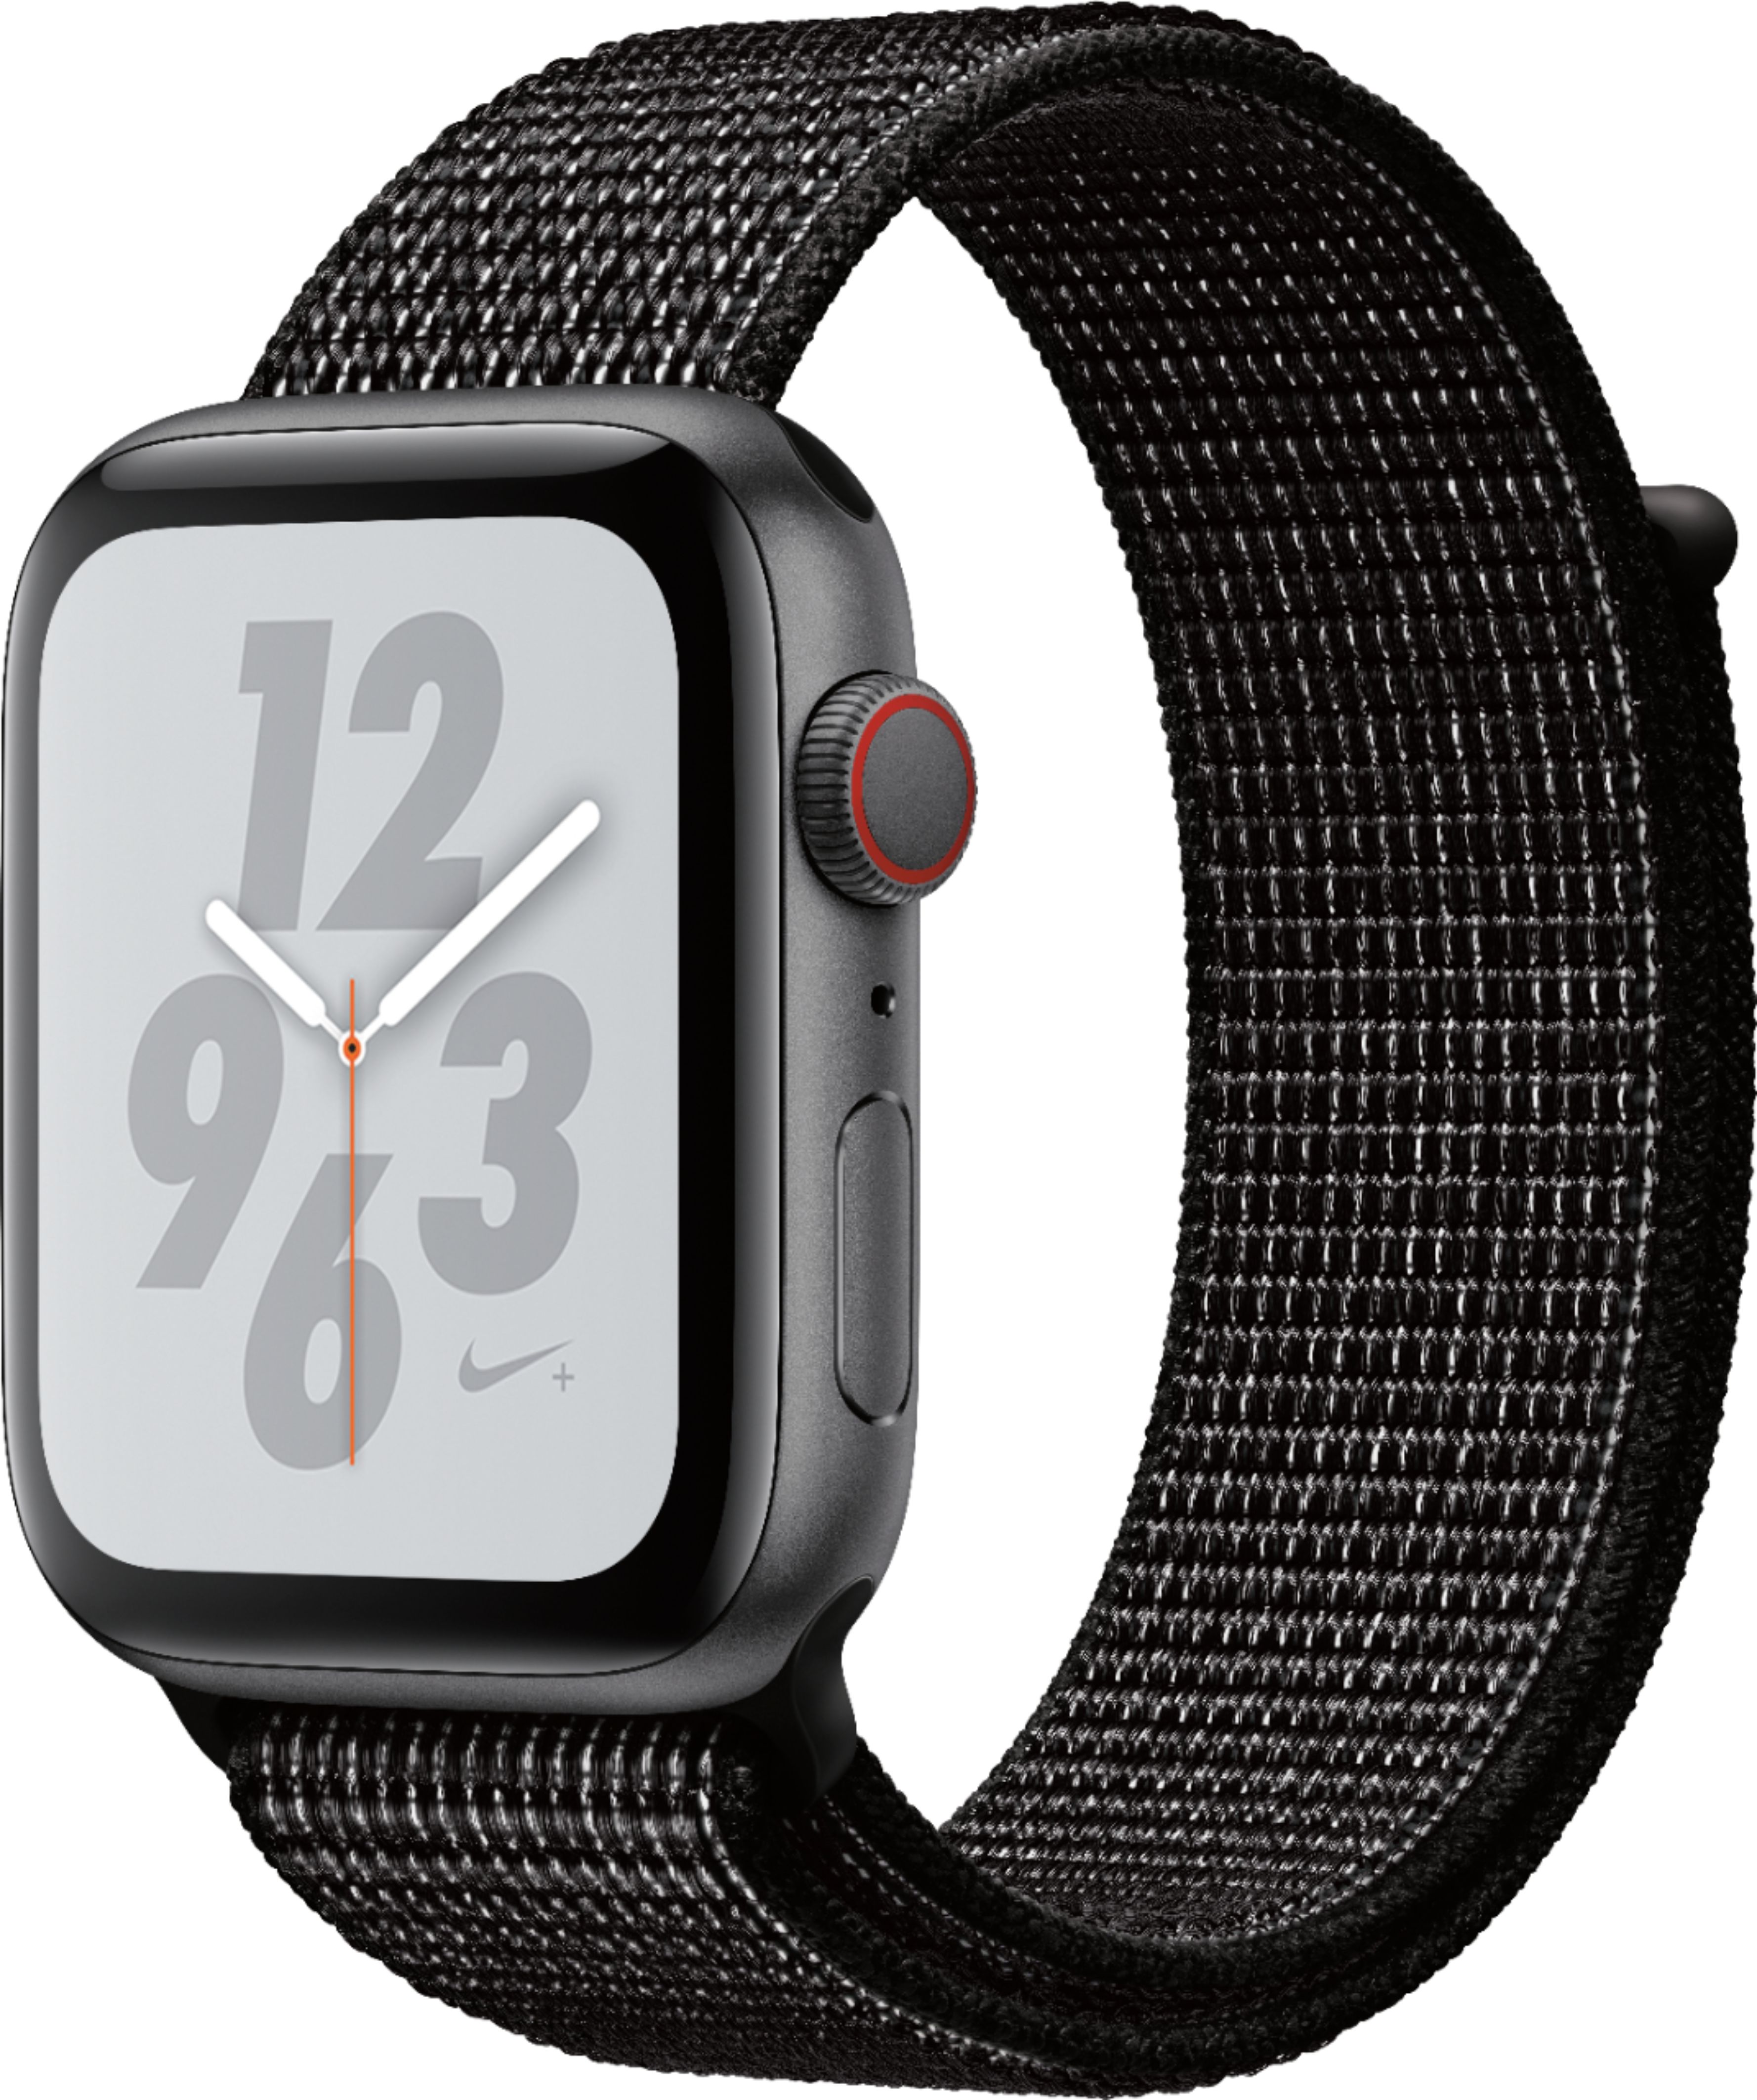 iphone watch series 4 cellular